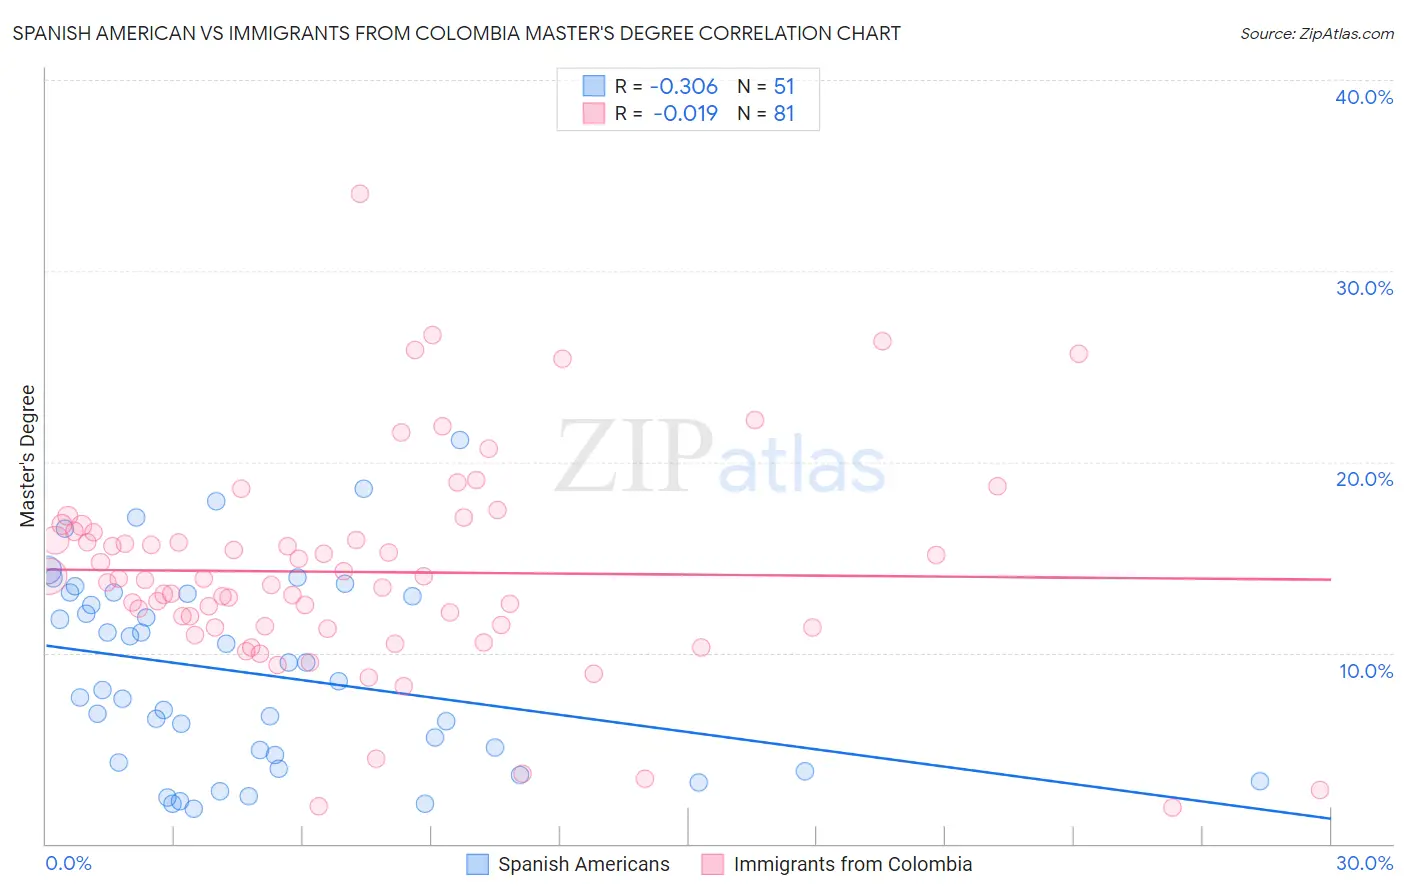 Spanish American vs Immigrants from Colombia Master's Degree